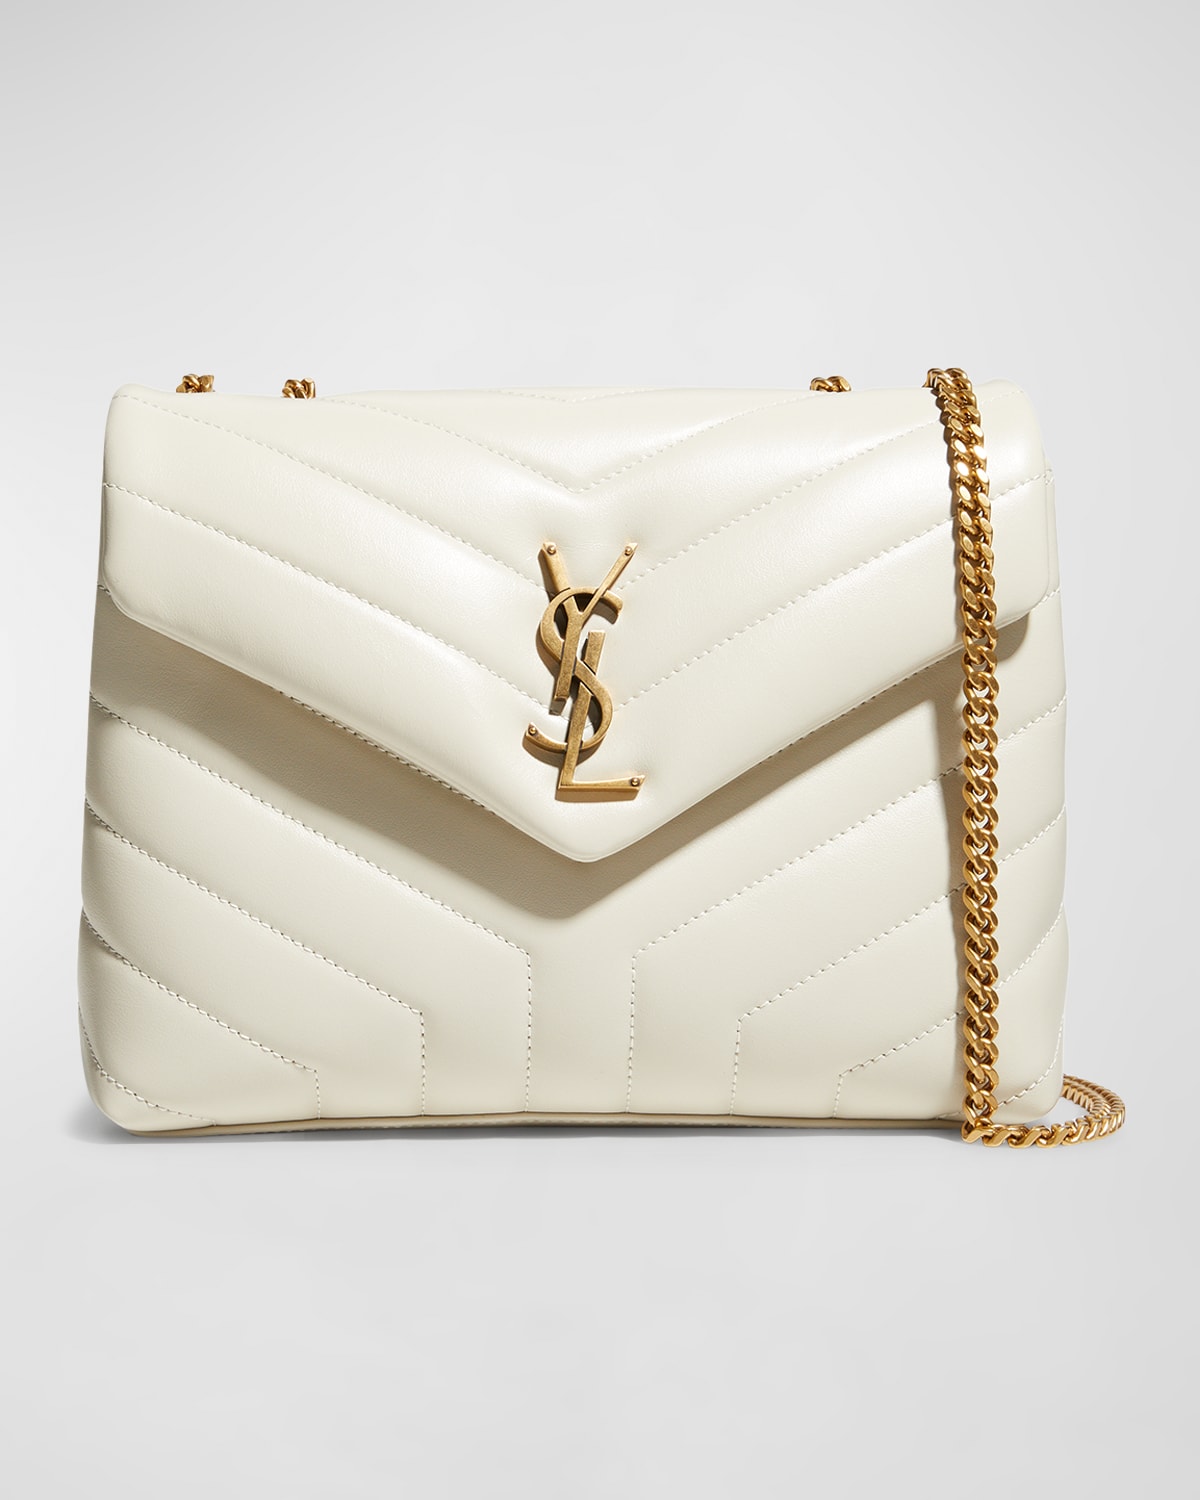 SAINT LAURENT Small White Leather Quilted Bag Loulou